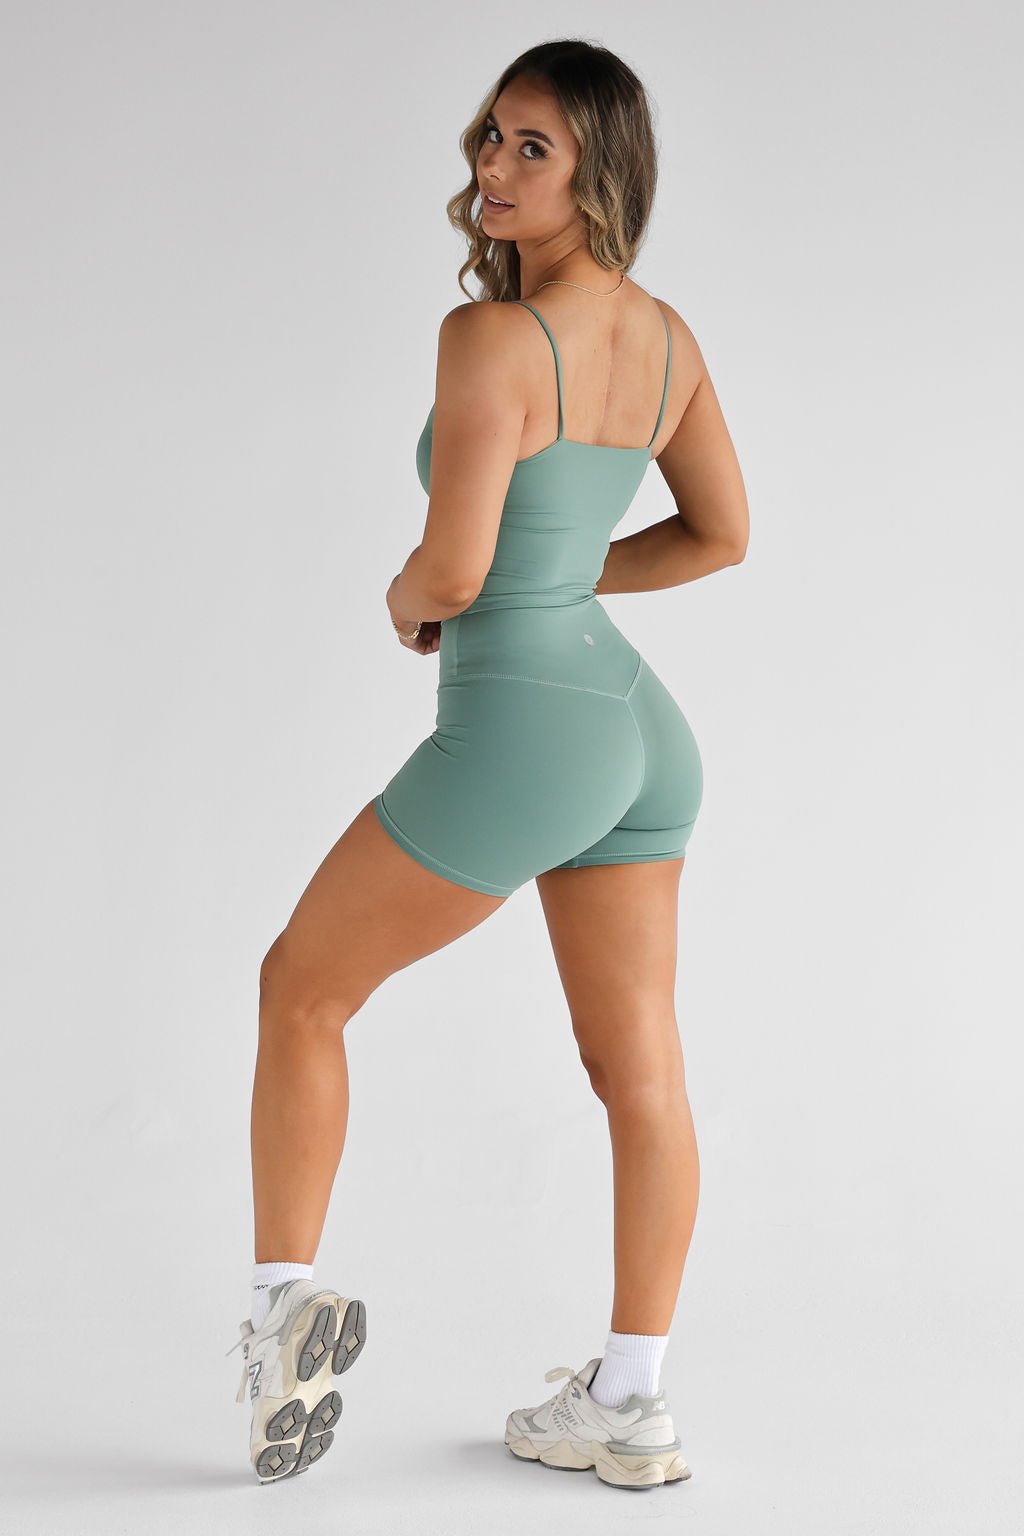 SCULPT Bike Shorts - Sage SHIPPING FROM 3/11 - LEELO ACTIVE